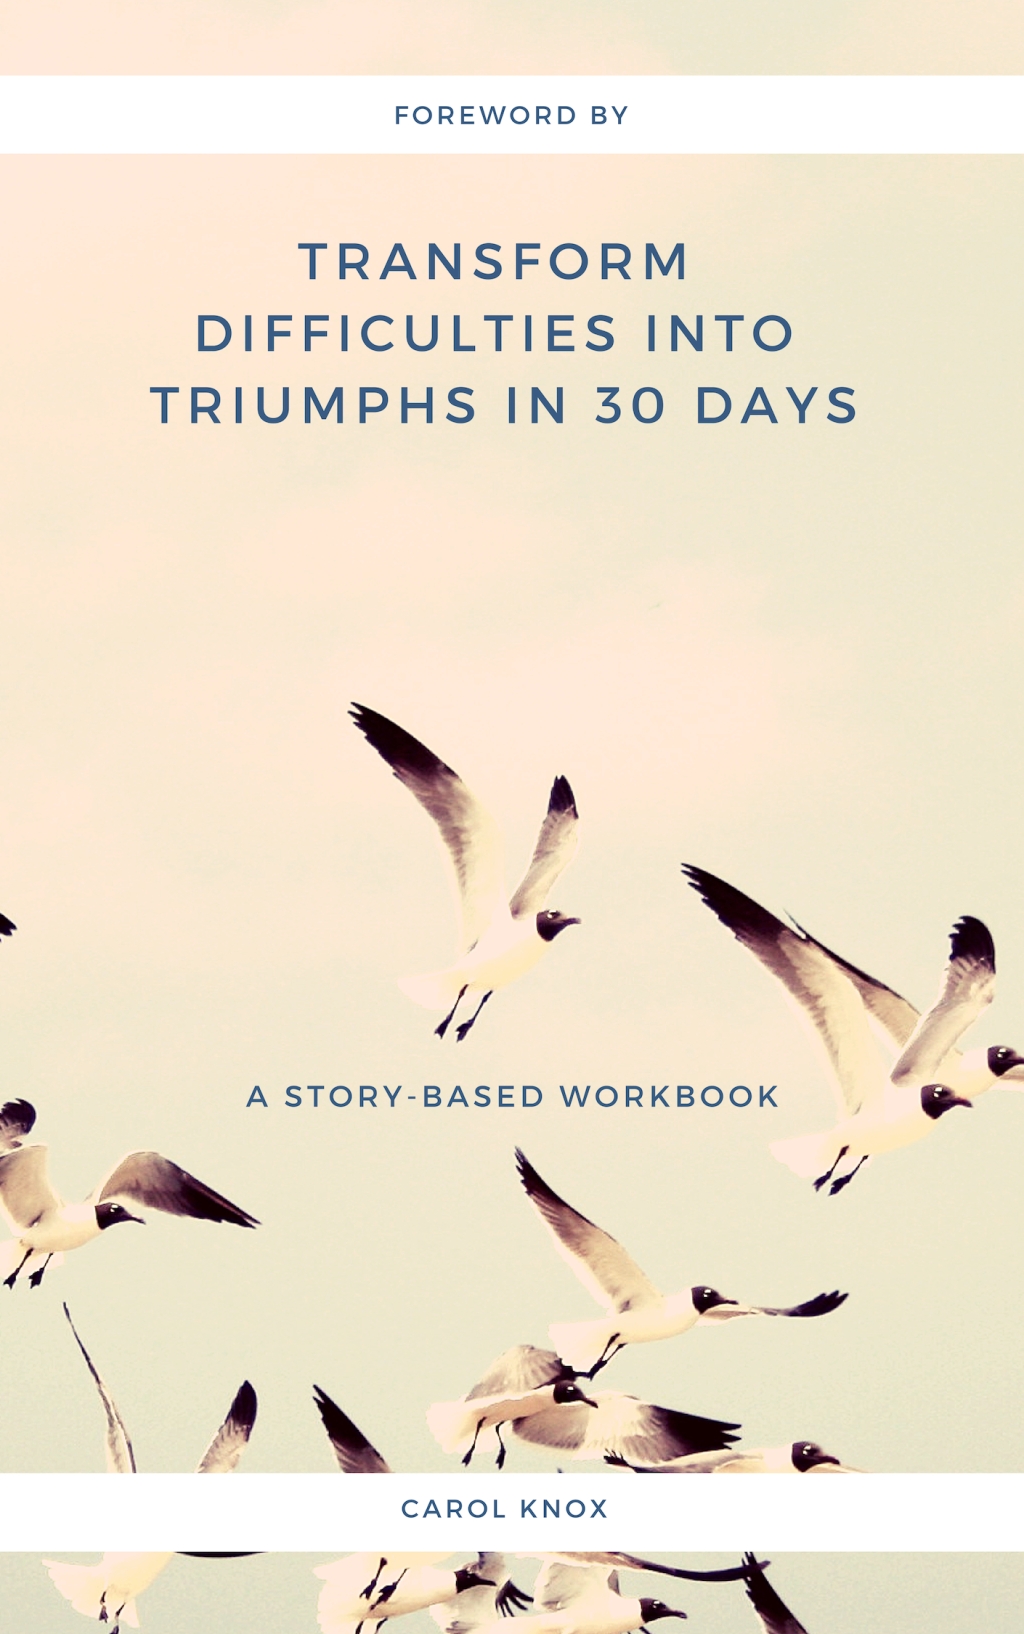 Day 5 – Putting Your Focus on a Project from Transform Difficulties into Triumphs